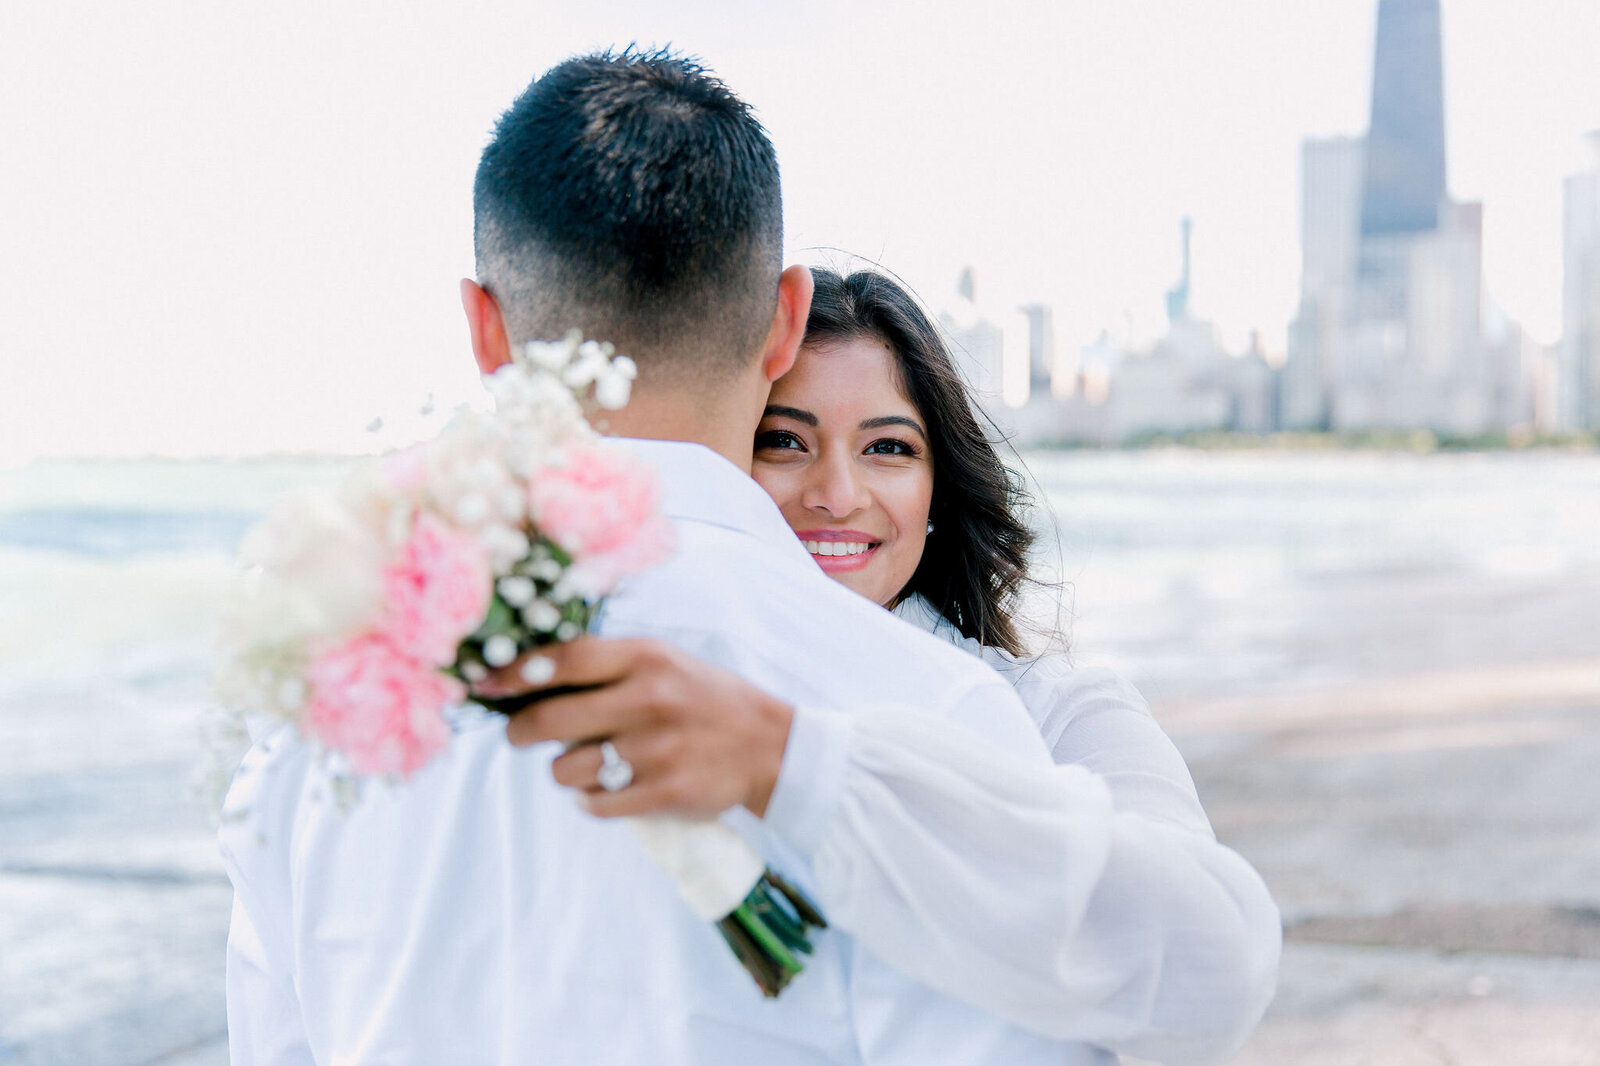 Marriage  proposals are one of those nerve wracking, sweet - inducing, blissful moments that you want to remember forever.